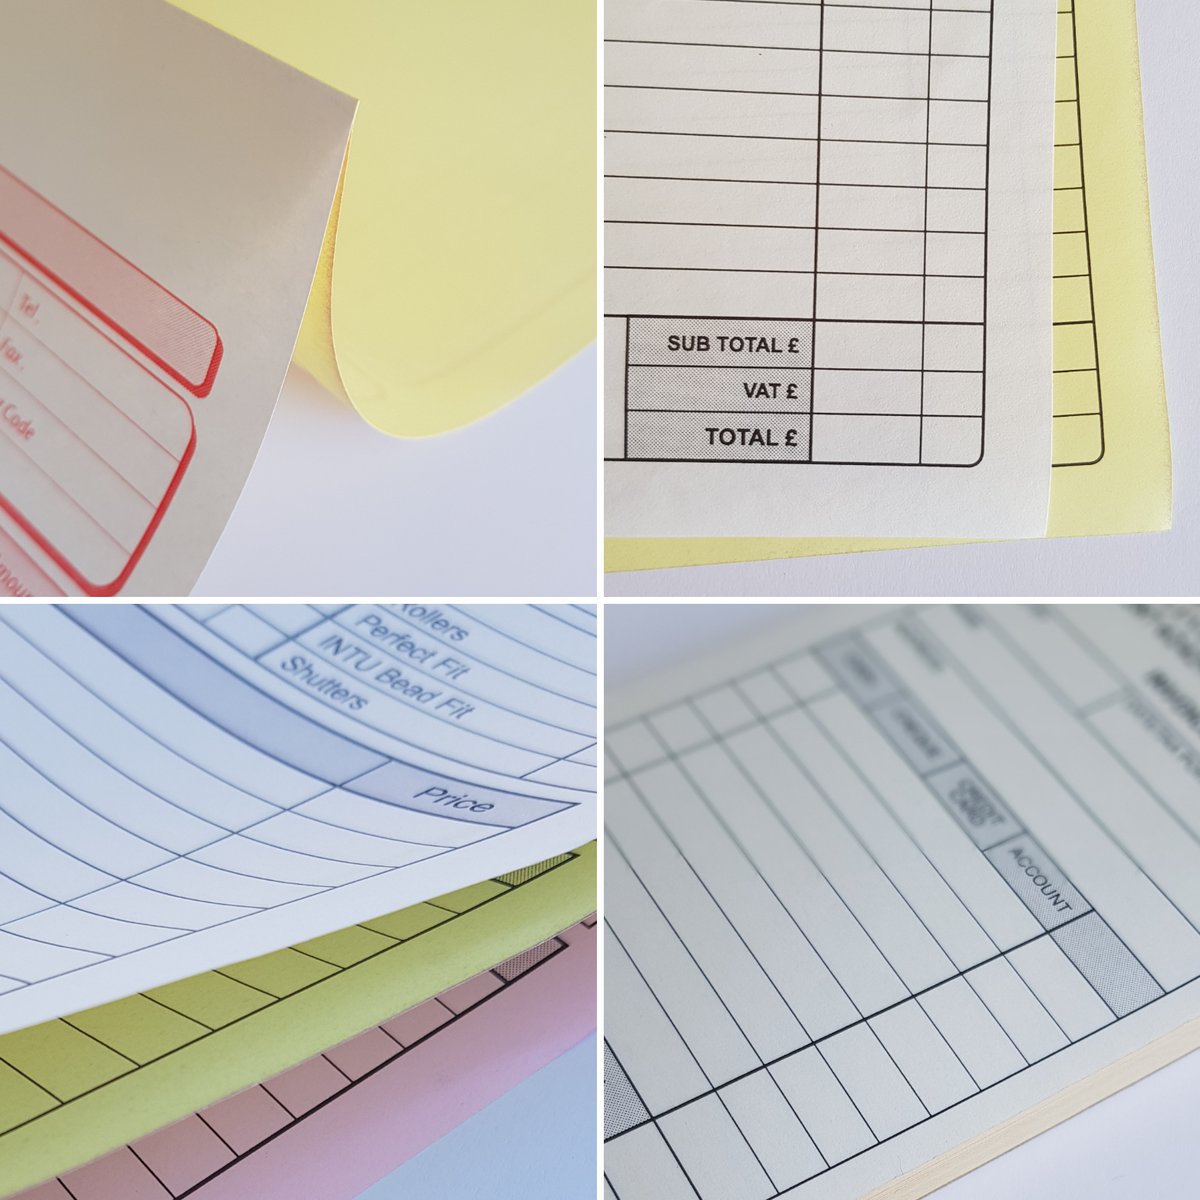 NCR printing is our speciality! We custom print #jobsheets #orderforms #invoices #orderbooks #receipts #wastetrasfernotes #permittowork #timesheets #accidentreports #incidentforms
Shop Personalised Carbonless NCR Pads Now:
mdprintshop.co.uk/collections/nc…
#ncrprint #ncrforms #forms #ncr